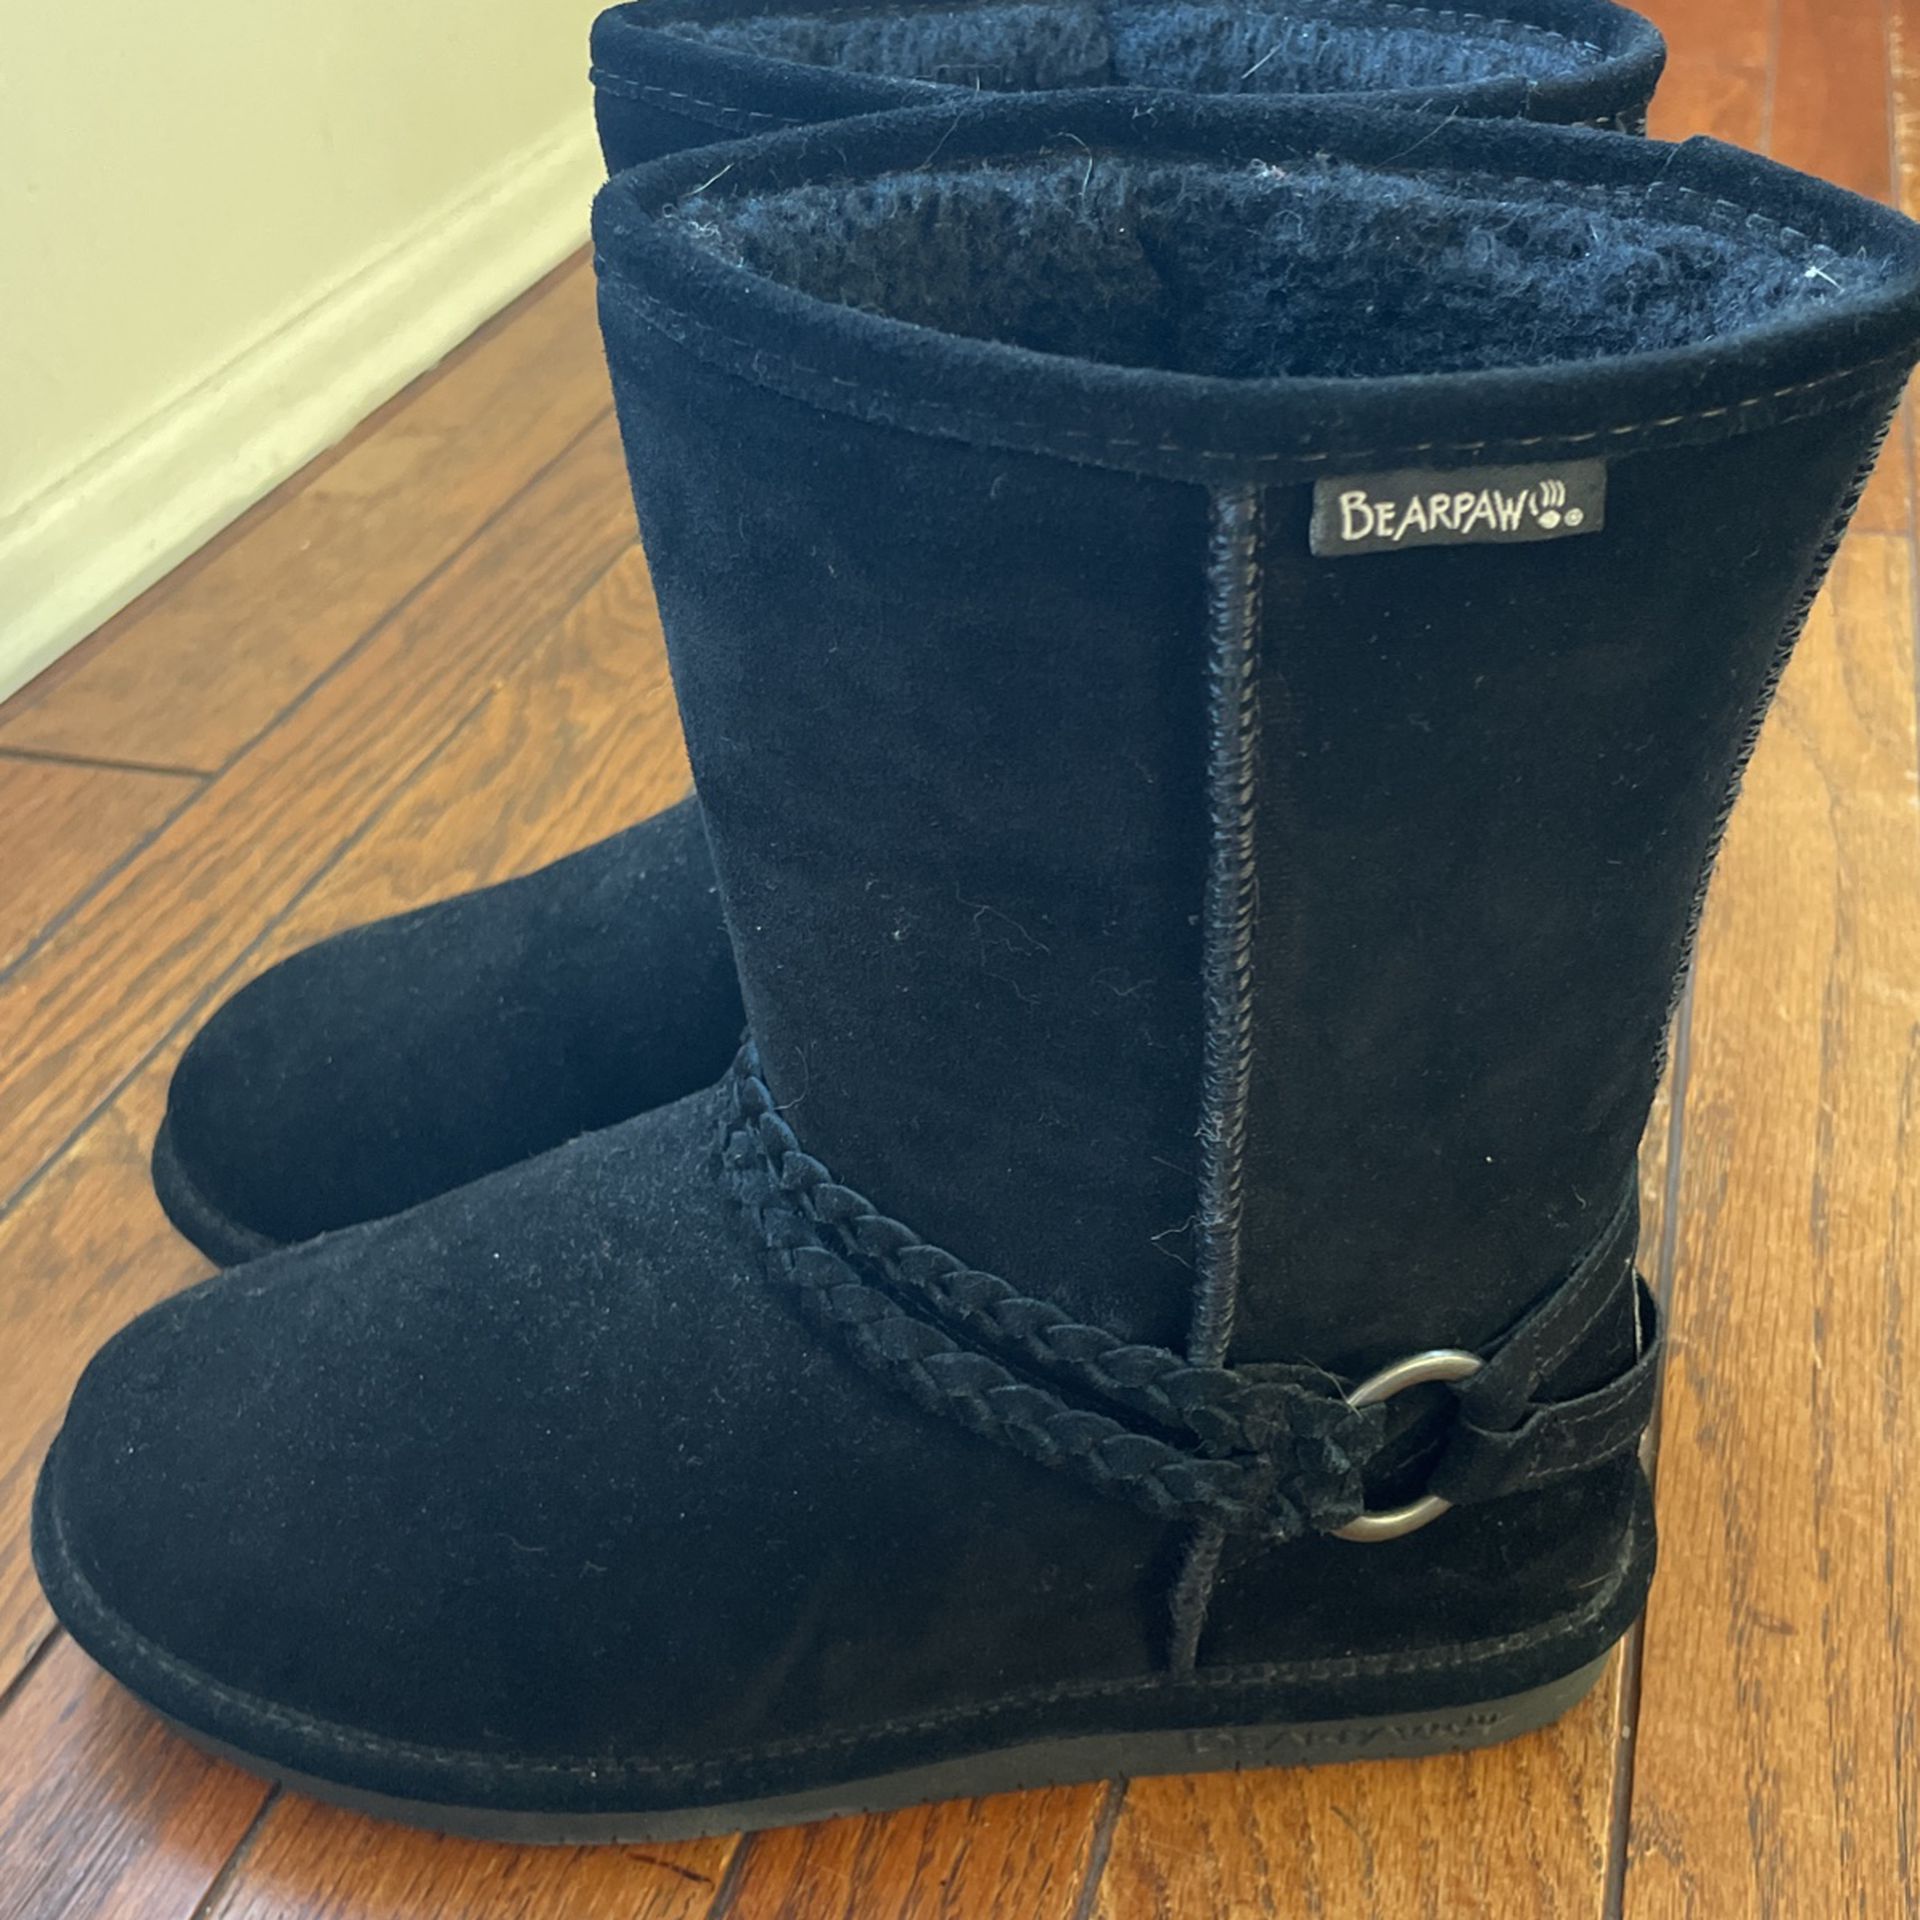 Bear paw Boots Size 10 